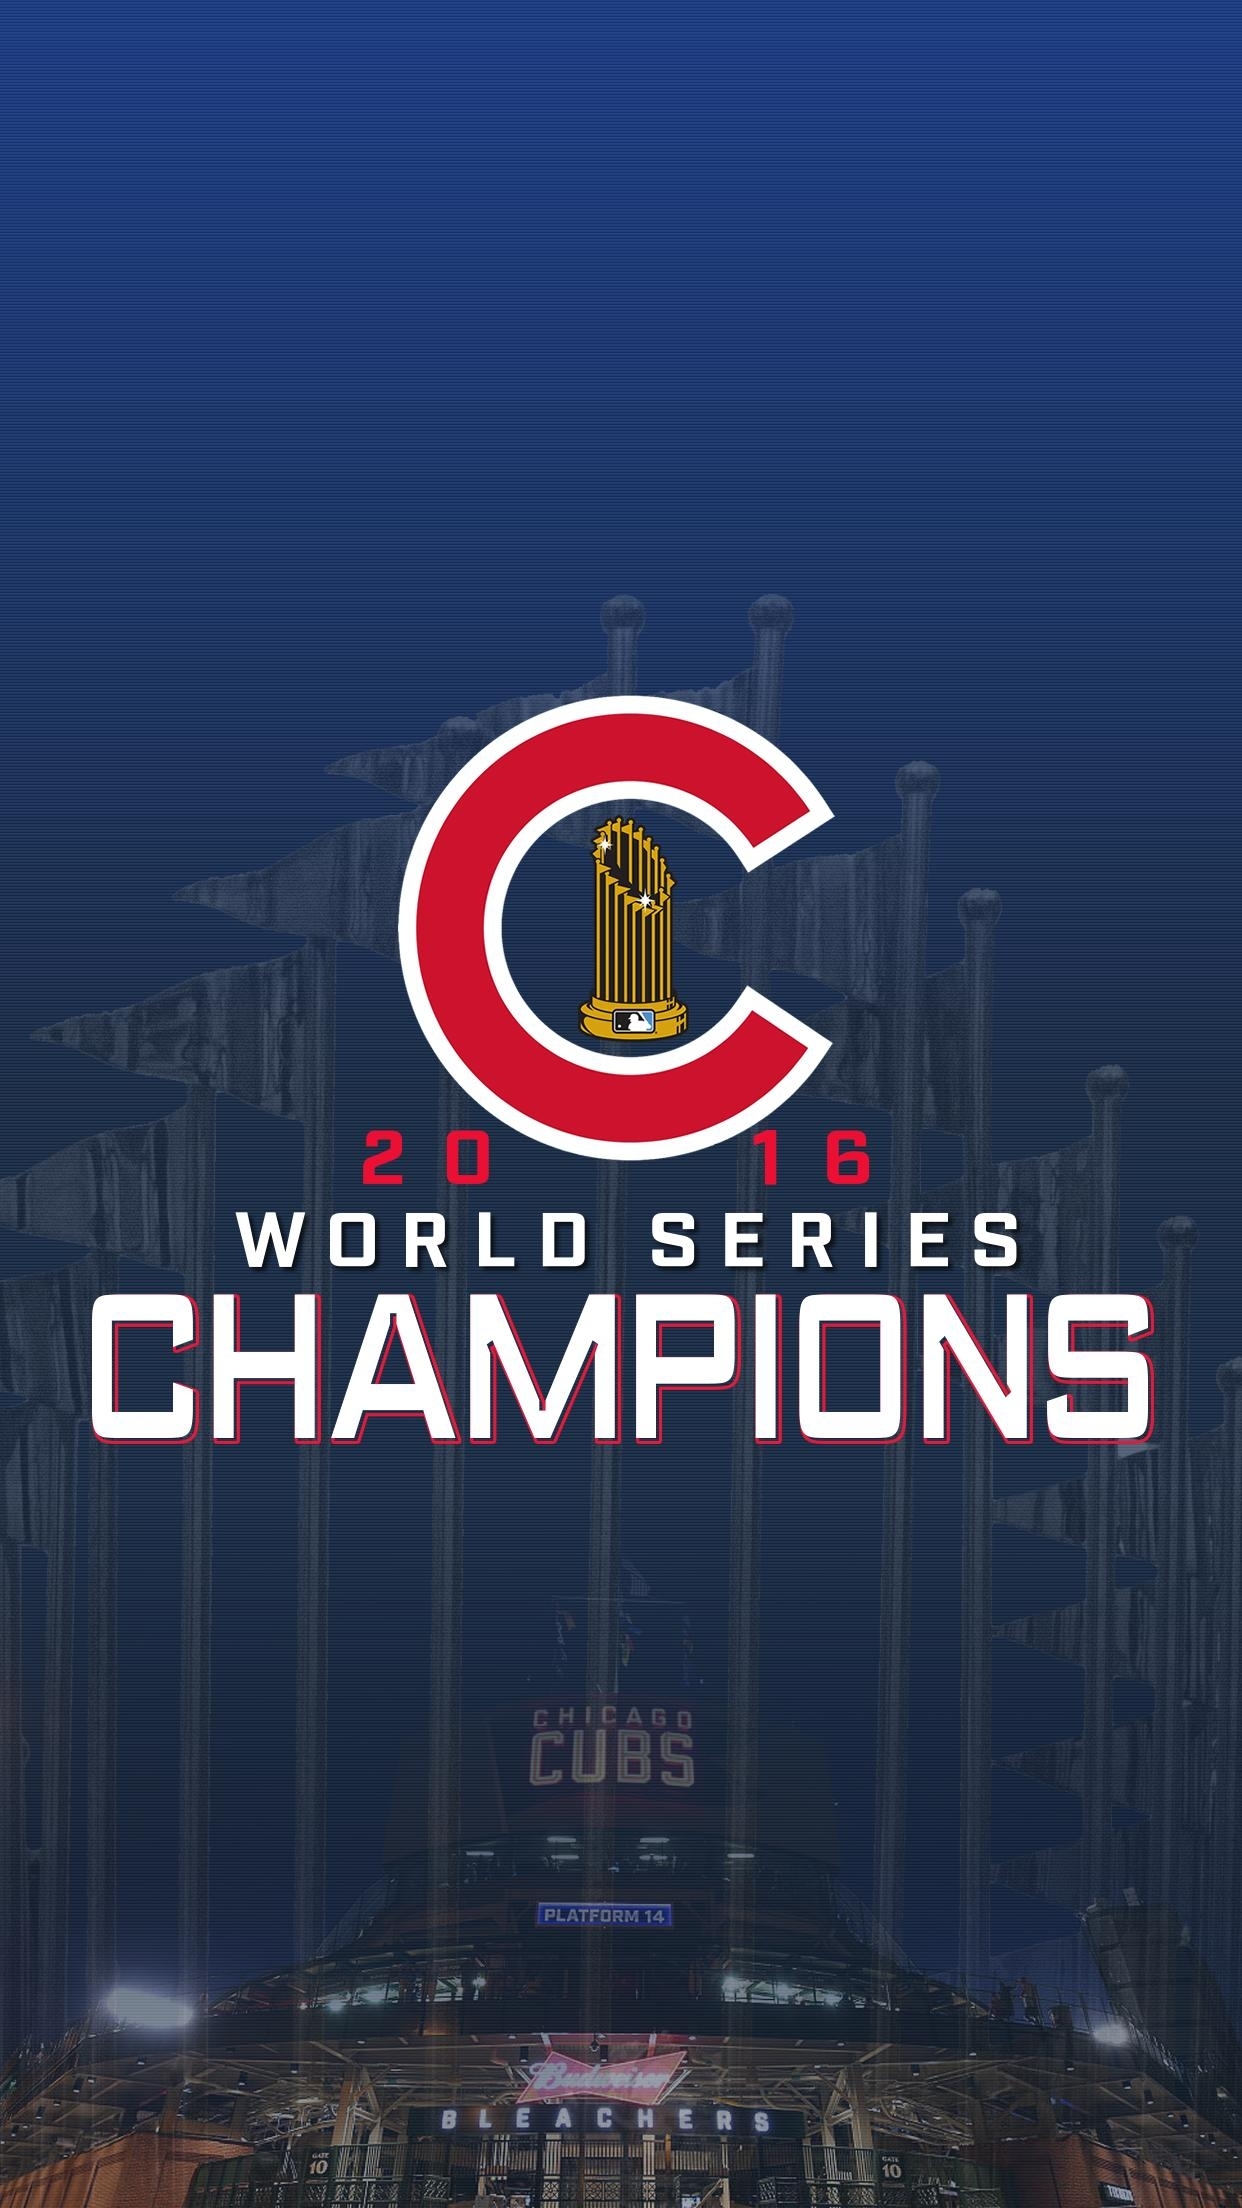 10 Best Chicago Cubs Android Wallpaper FULL HD 1920×1080 For PC Background